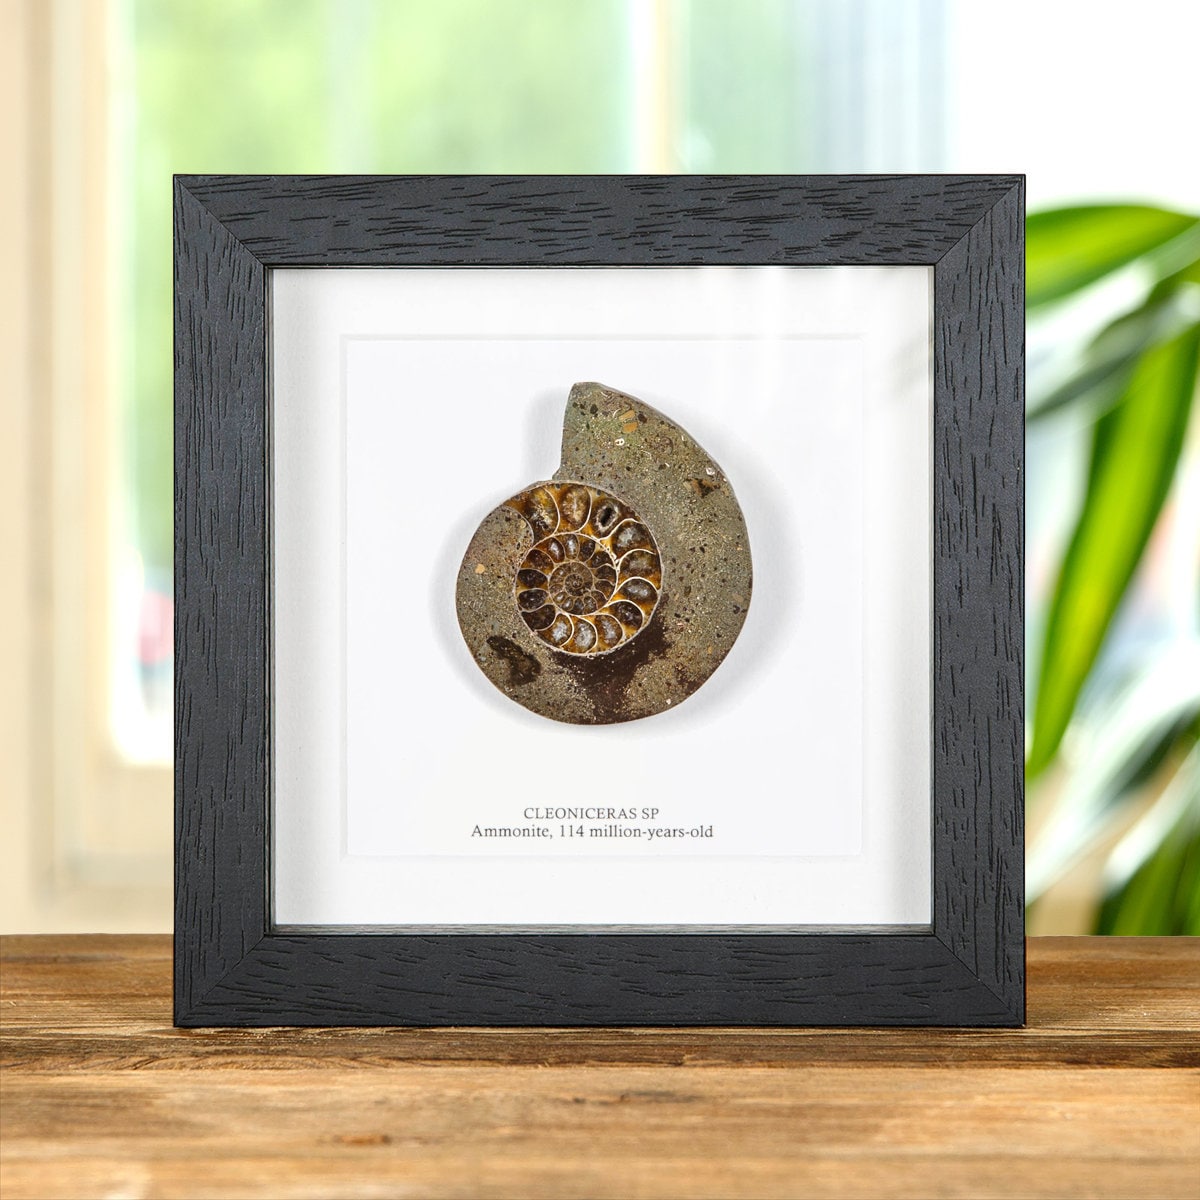 Cut and Polished Ammonite Fossil in Box Frame Cleoniceras sp